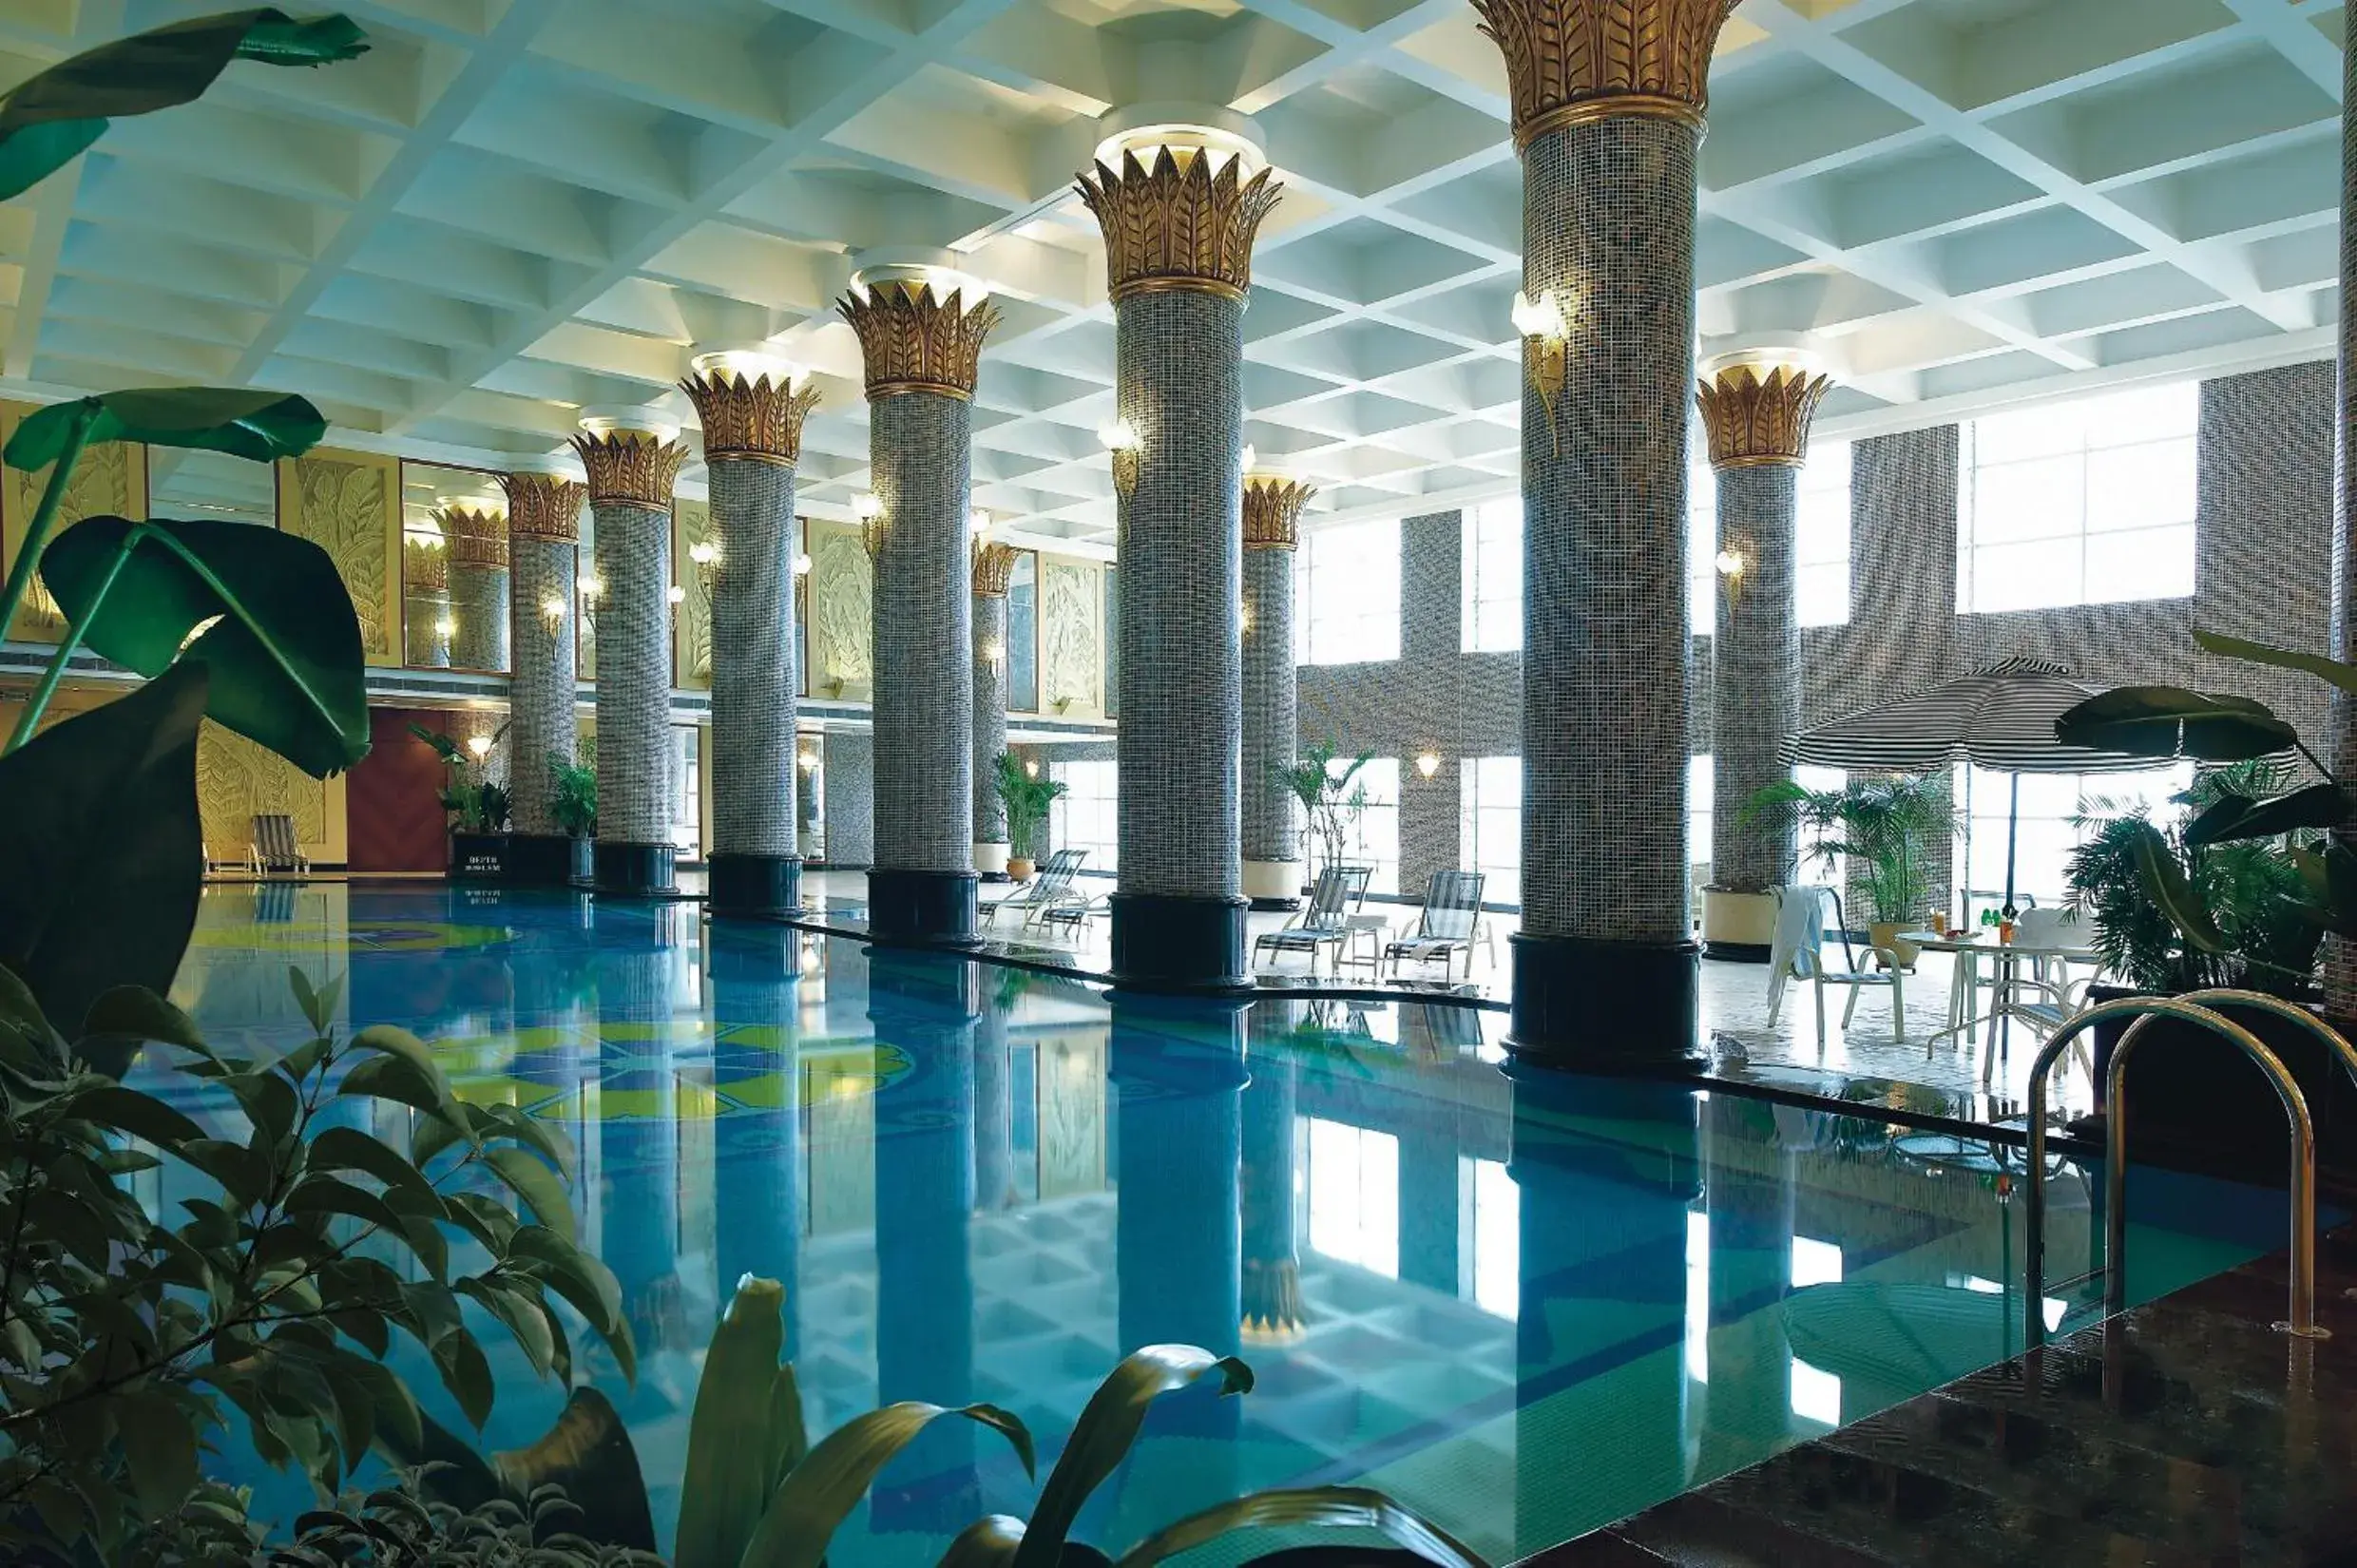 Swimming Pool in Regal Palace Hotel